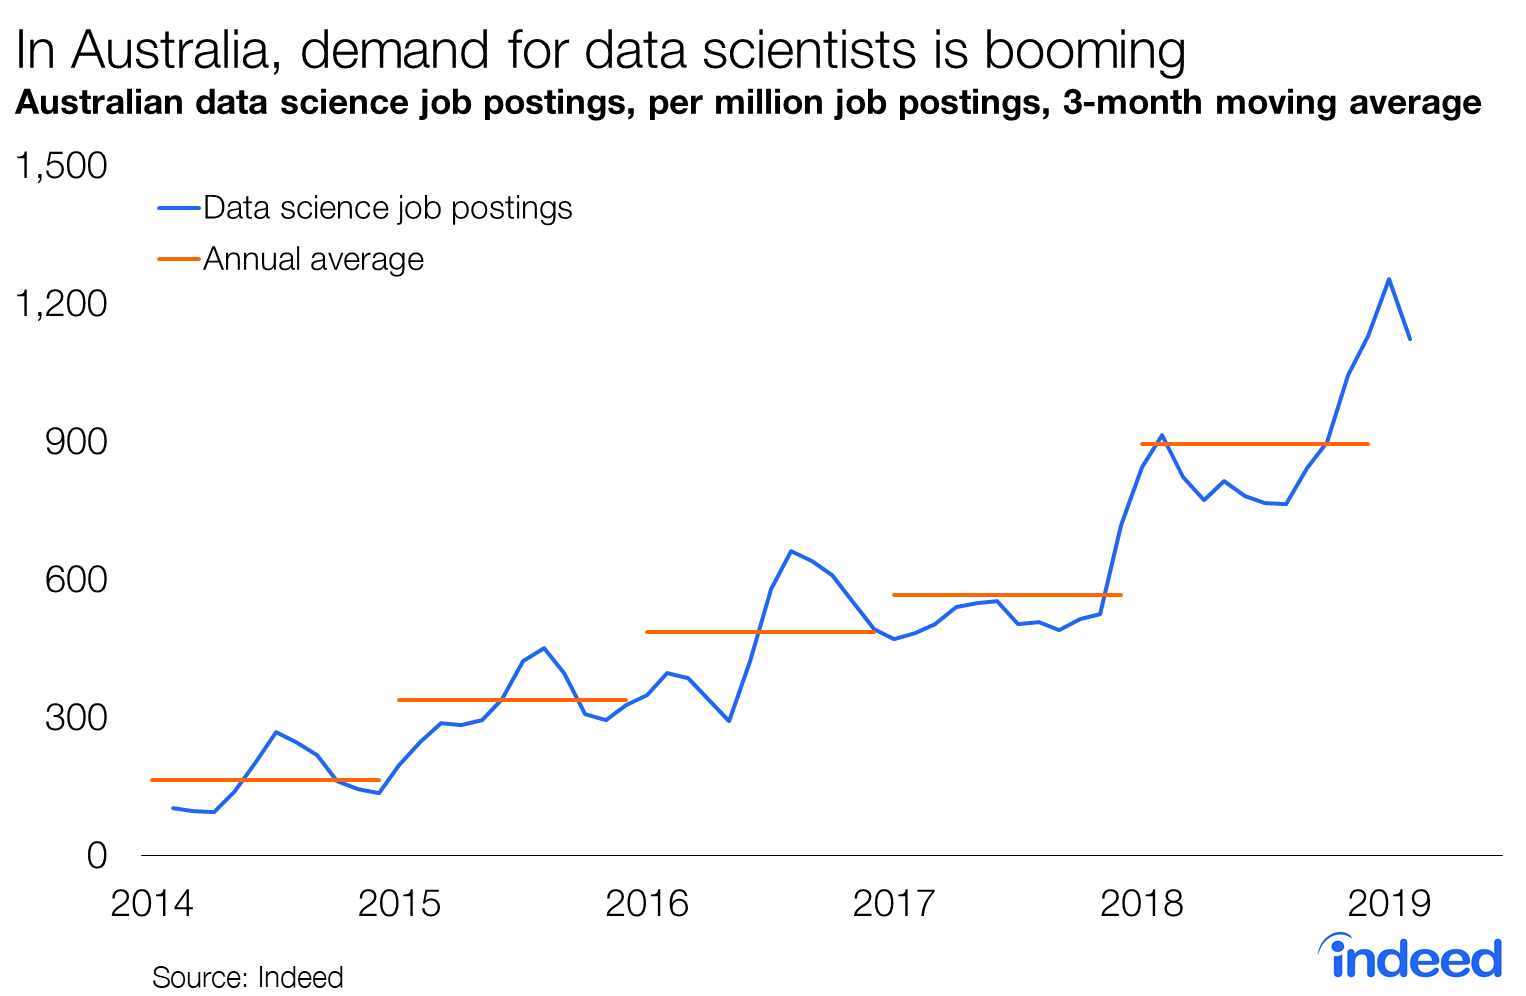 In Australia, demand for data scientists is booming